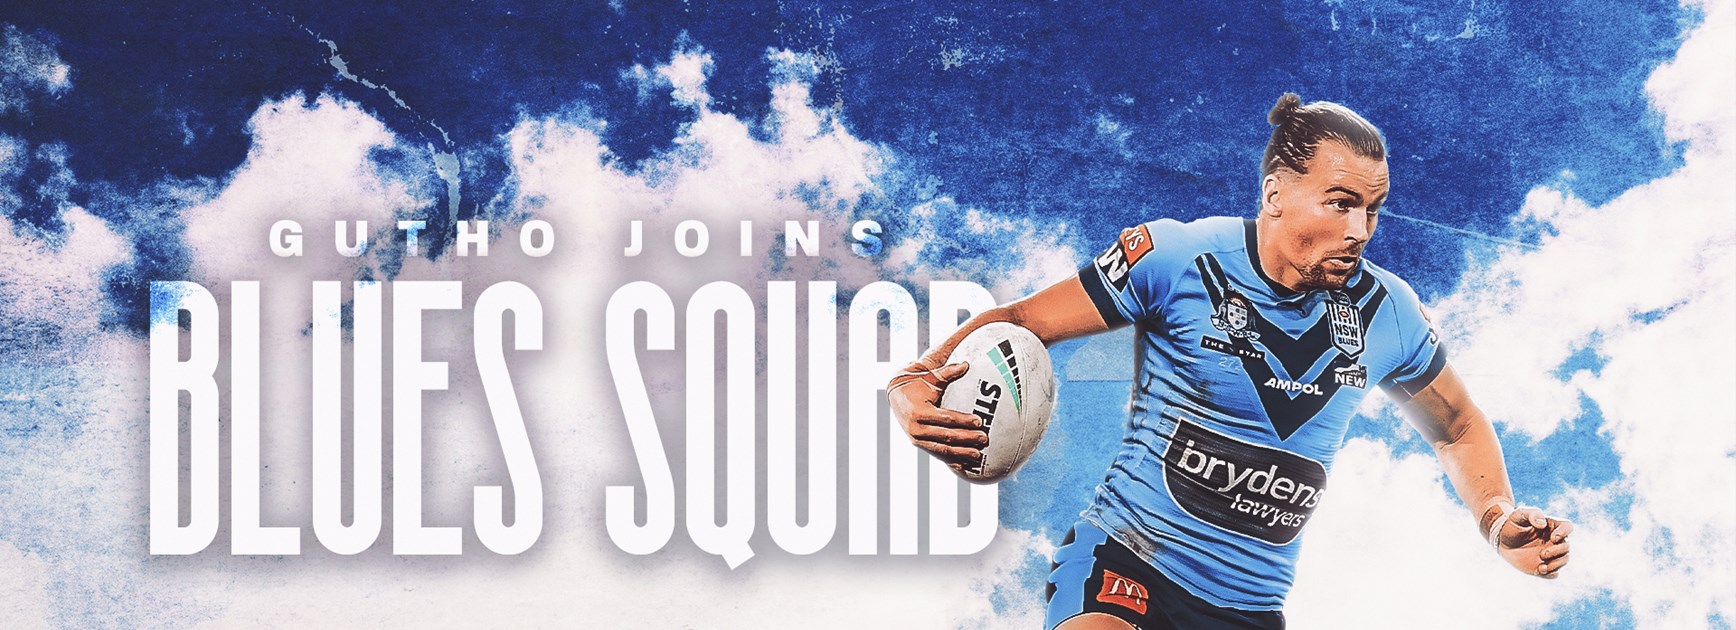 Clint Gutherson added to NSW Blues squad for Origin III